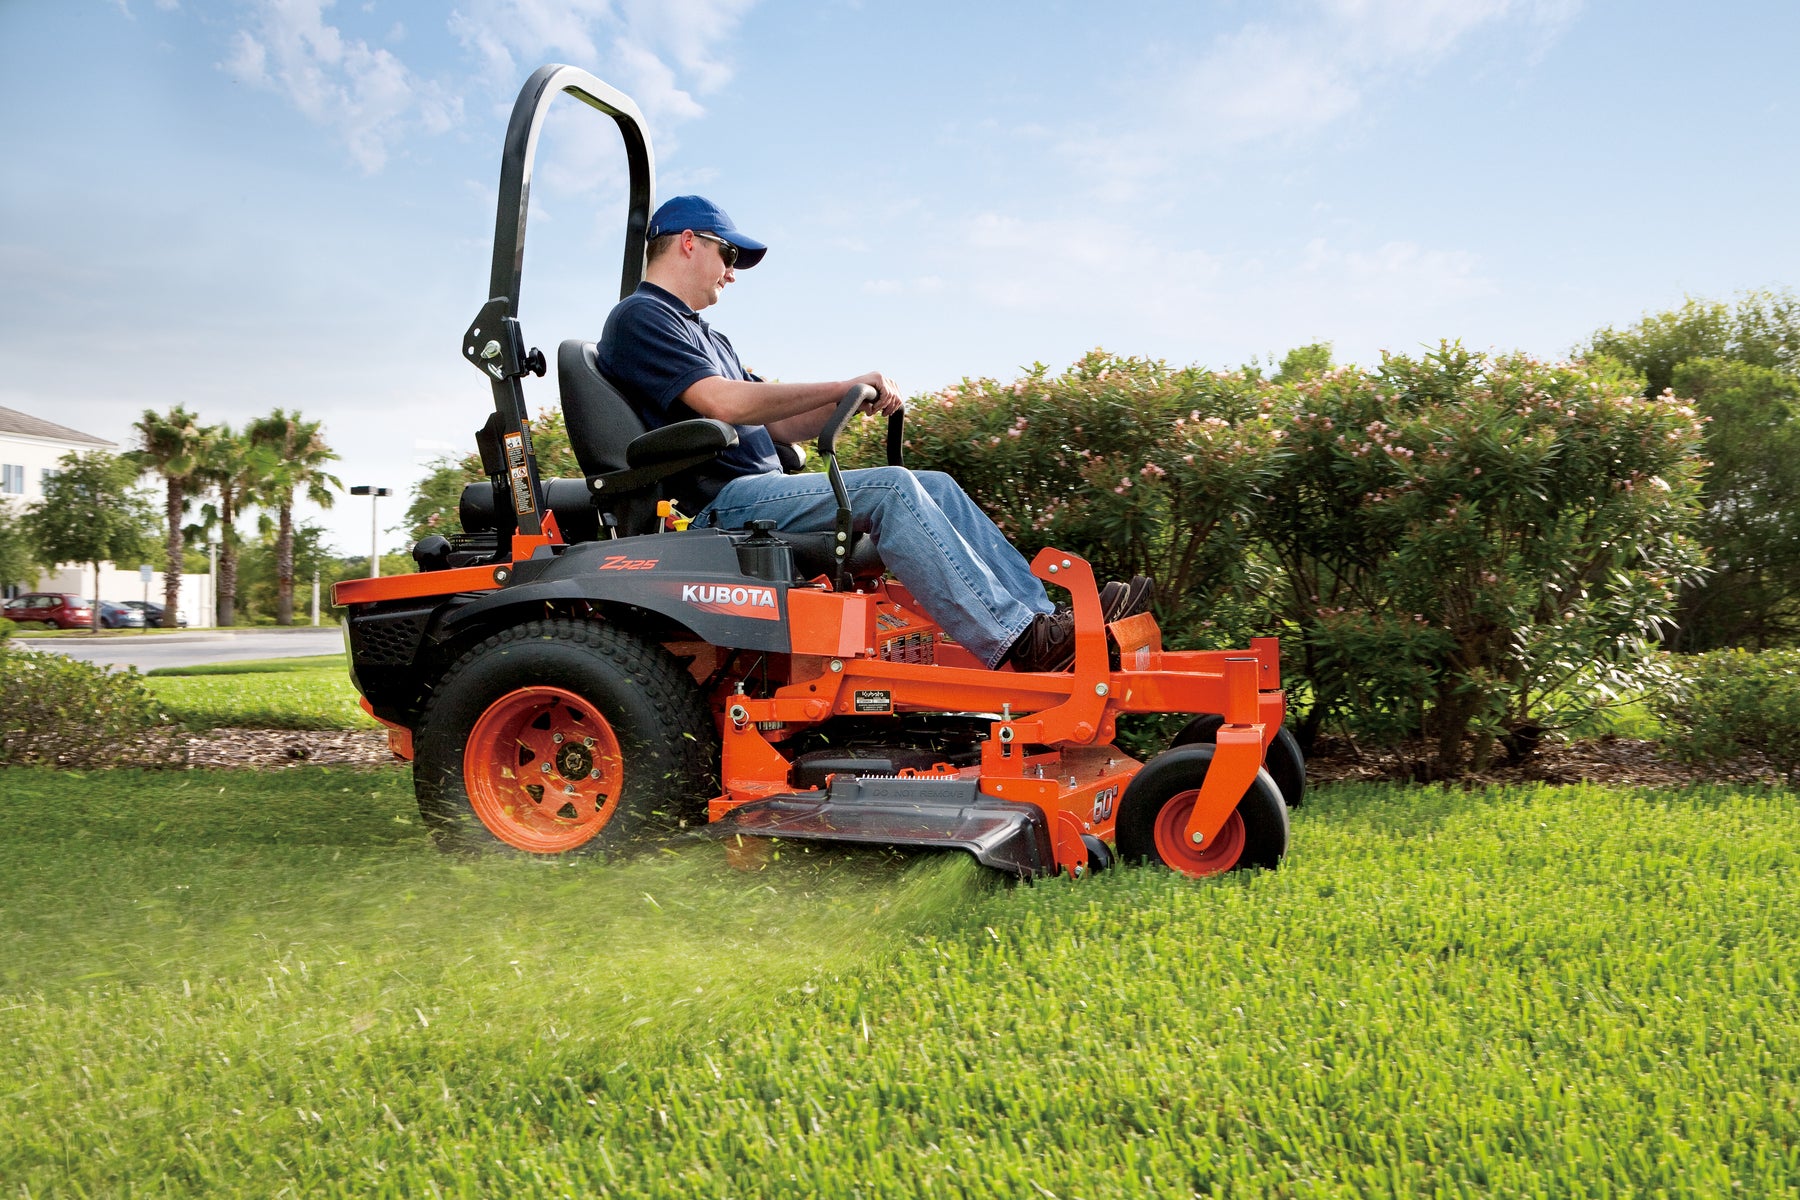 The Ultimate Guide to Choosing the Right Zero Turn Mower for Your Lawn